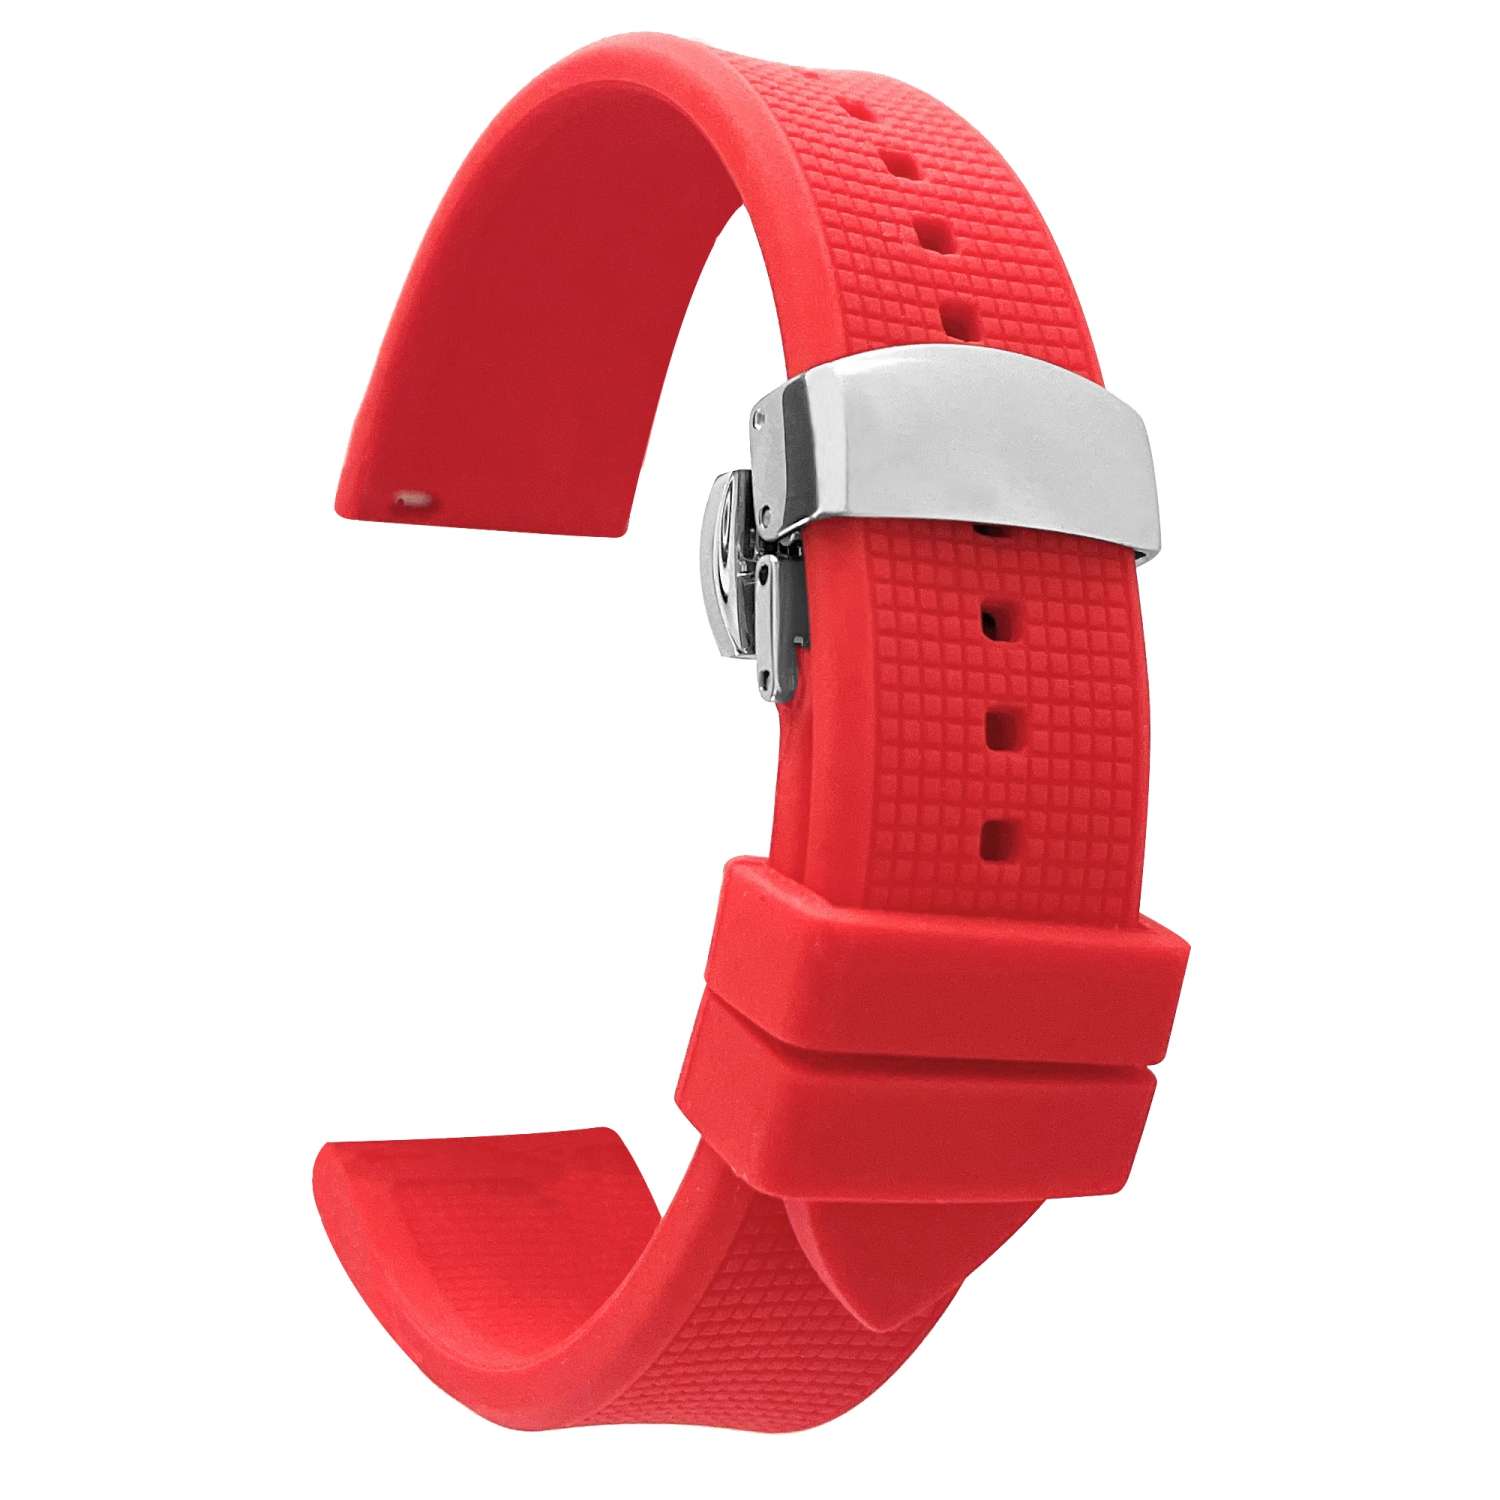 Bandini Waterproof Soft Rubber Silicone Deployment Smart Watch Band Strap For Samsung Galaxy Watch 4, Galaxy Watch 3 (41mm), Gear Sport, Active 2 & 1 - 20mm, Red